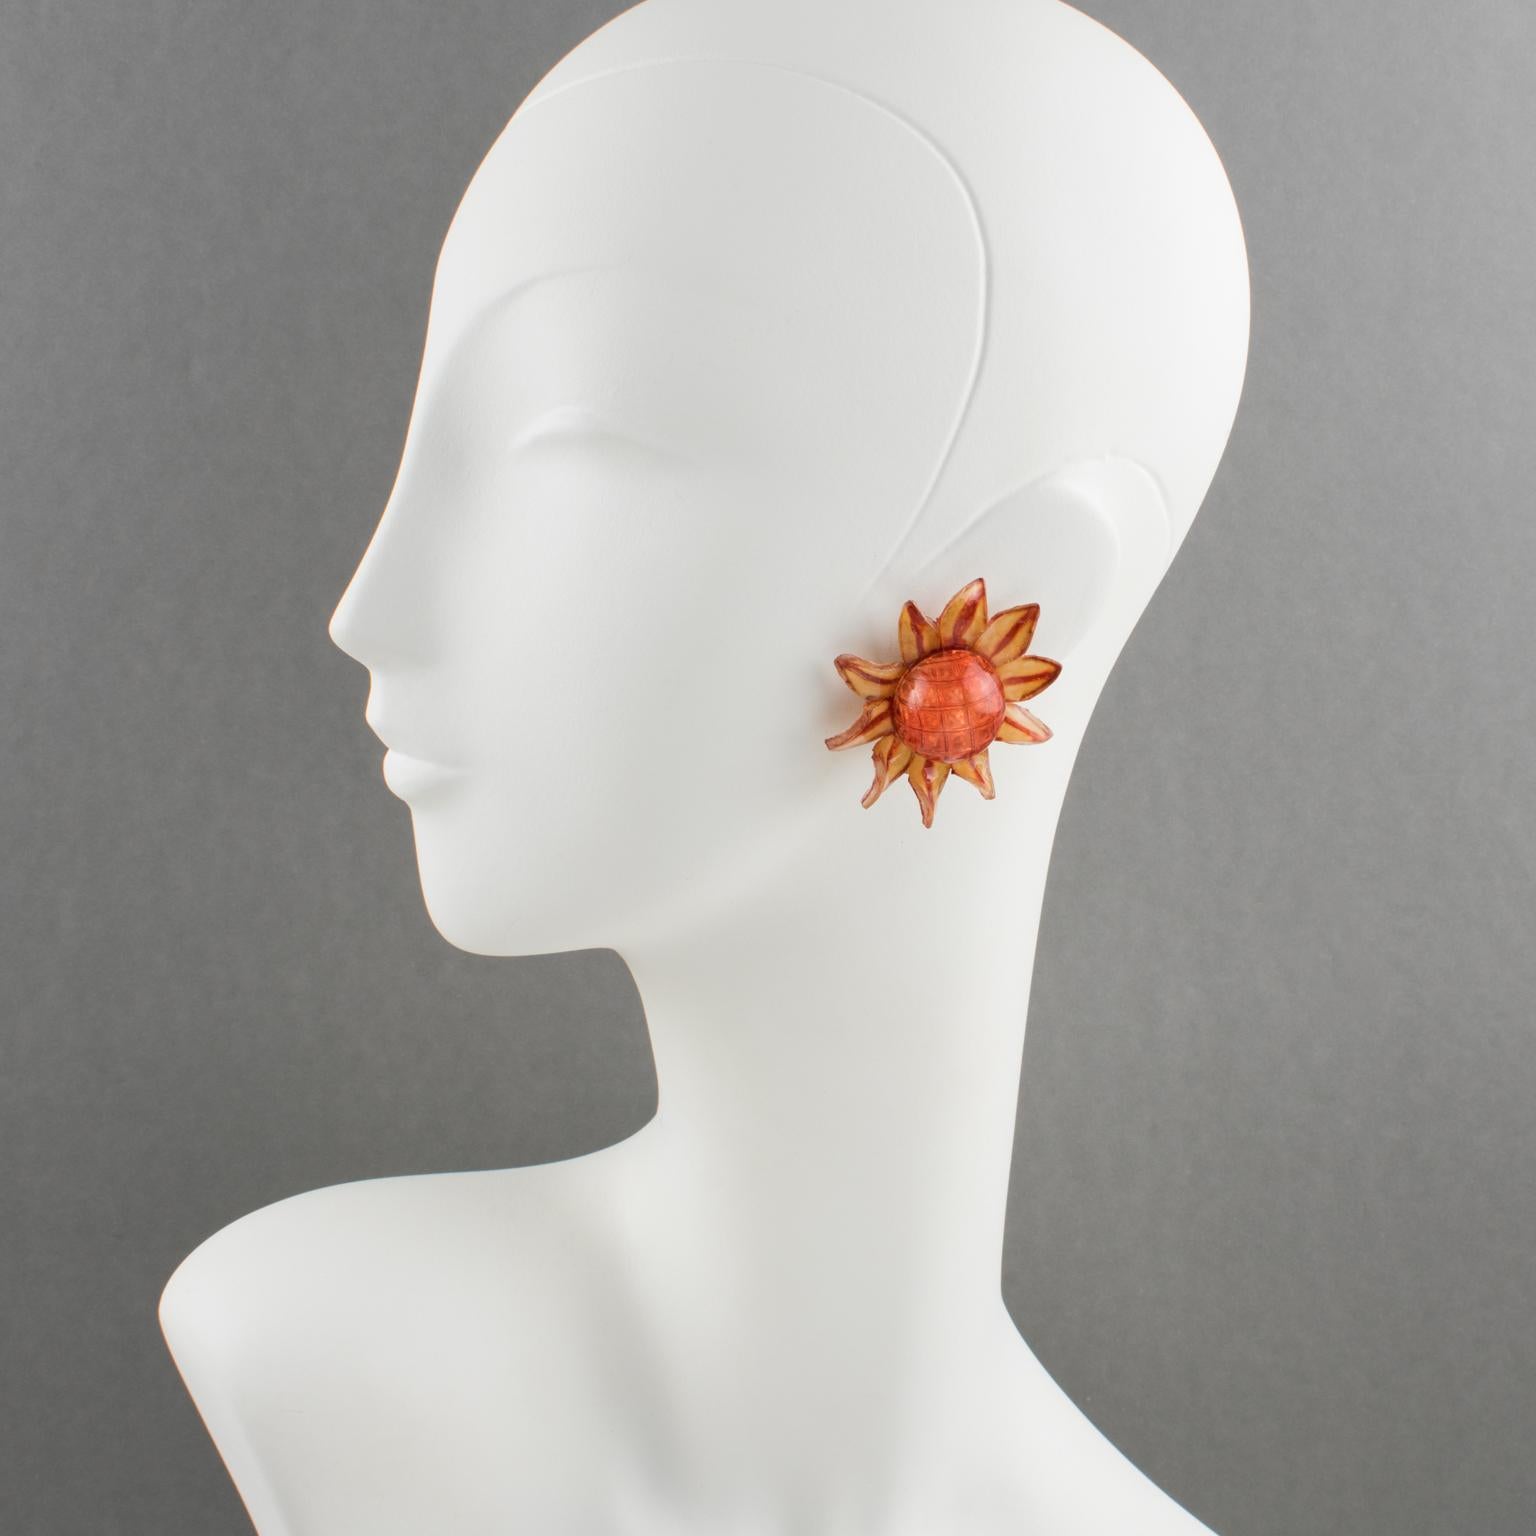 These elegant resin clip-on earrings were designed by French Jewelry artist Francoise Montague Paris and manufactured by Cilea. They feature a dimensional daisy flower shape with textured patterns in red, custard, and orange assorted colors. There